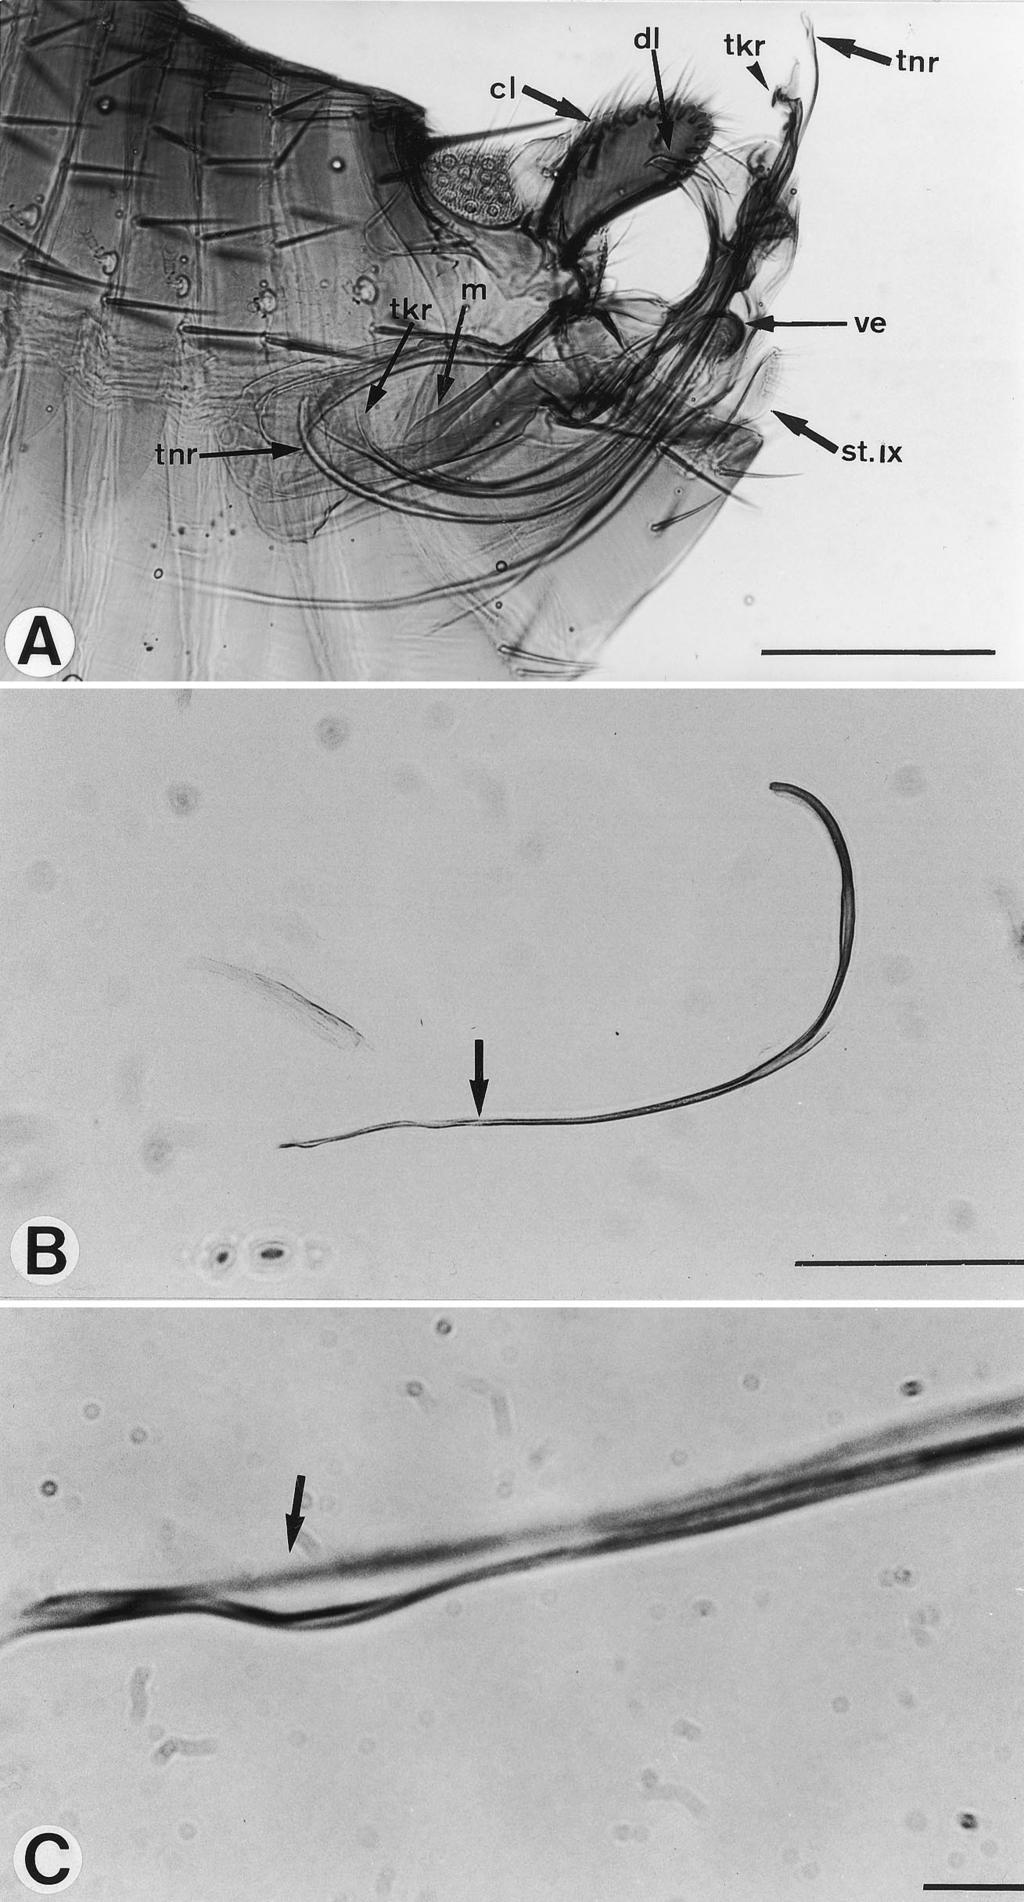 356 JOURNAL OF MEDICAL ENTOMOLOGY Vol. 38, no. 3 Fig. 3. (A) Exposed terminalia of the male cat ßea, showing that anterior ends of the manubria lower, elevating the claspers.